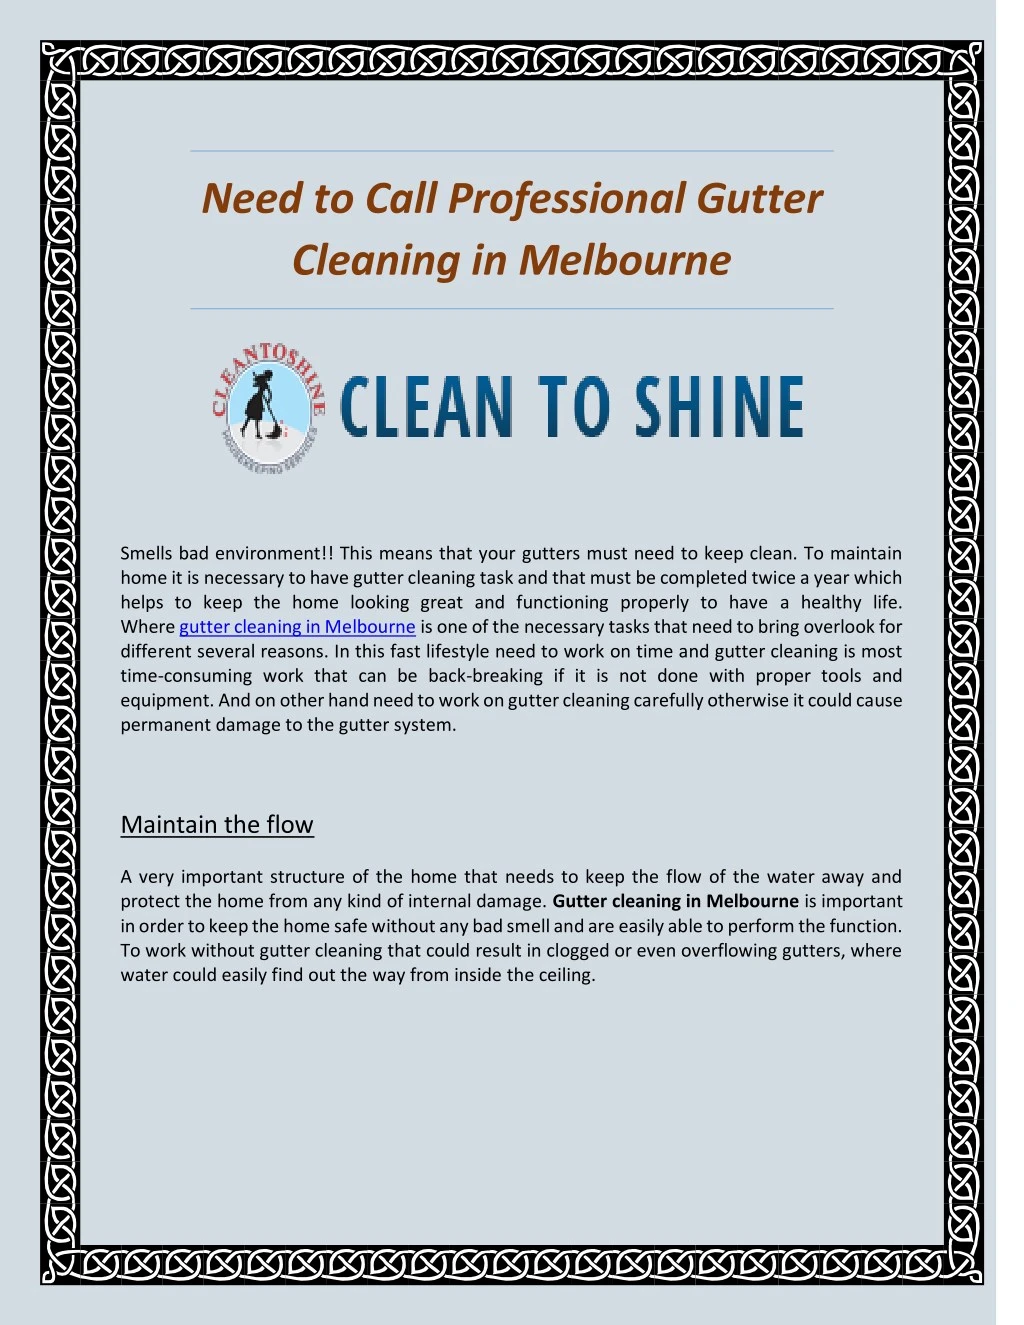 need to call professional gutter cleaning